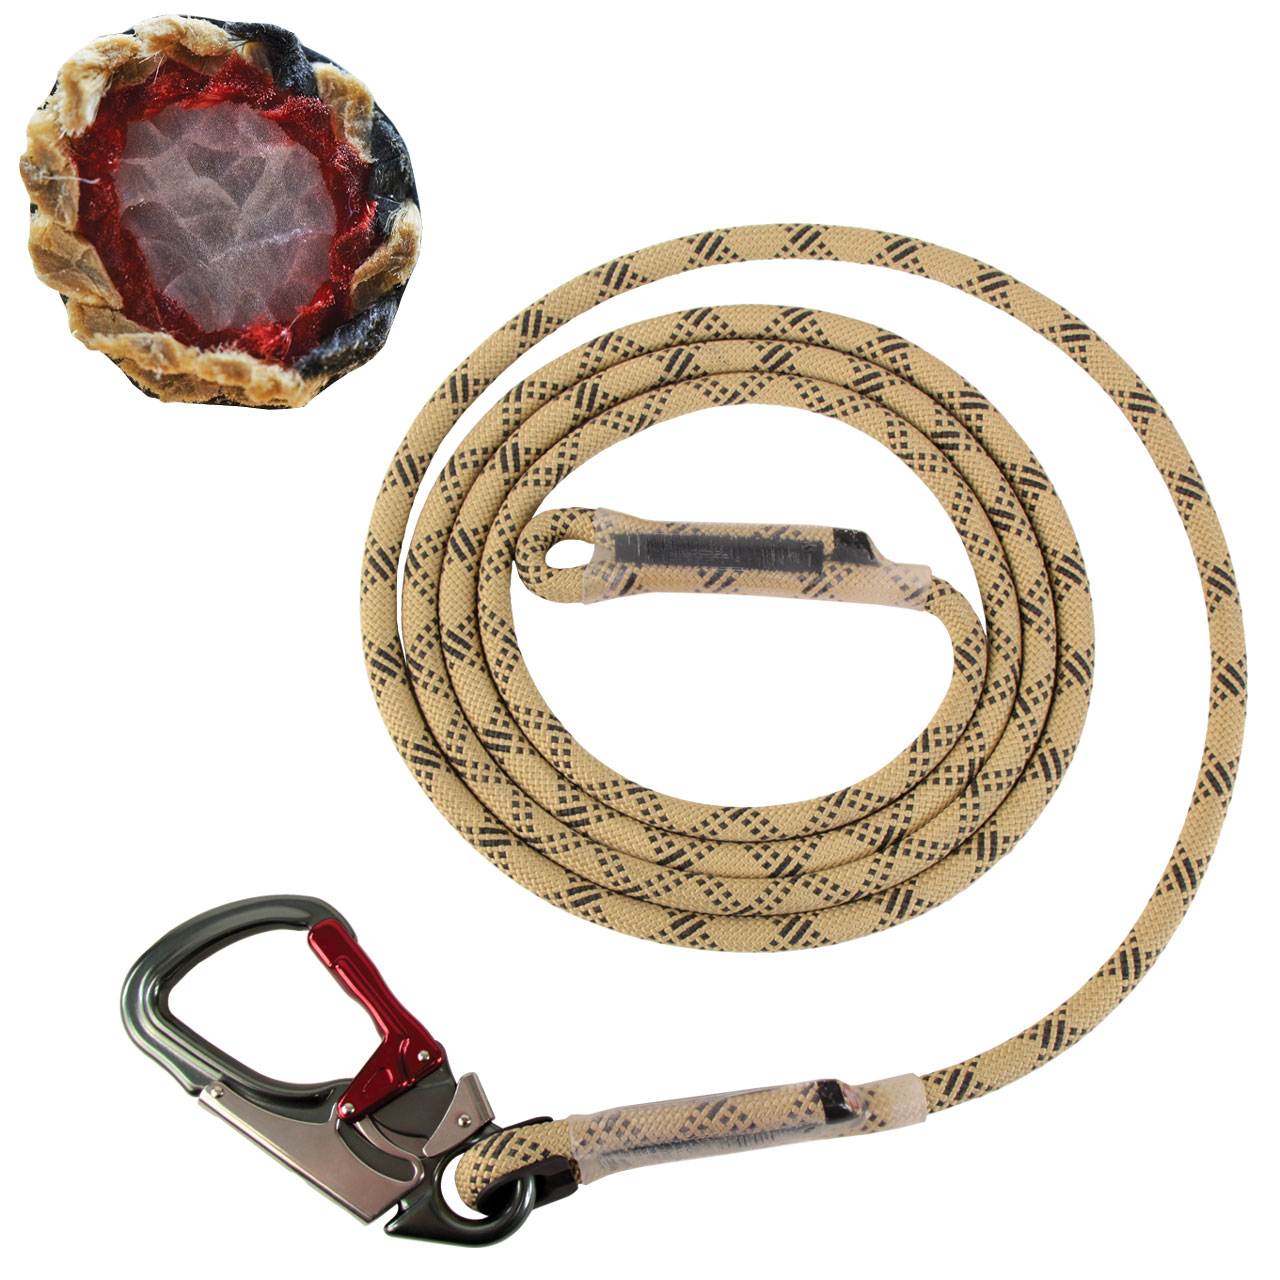 Red is No Go Tree Climbing Lanyard